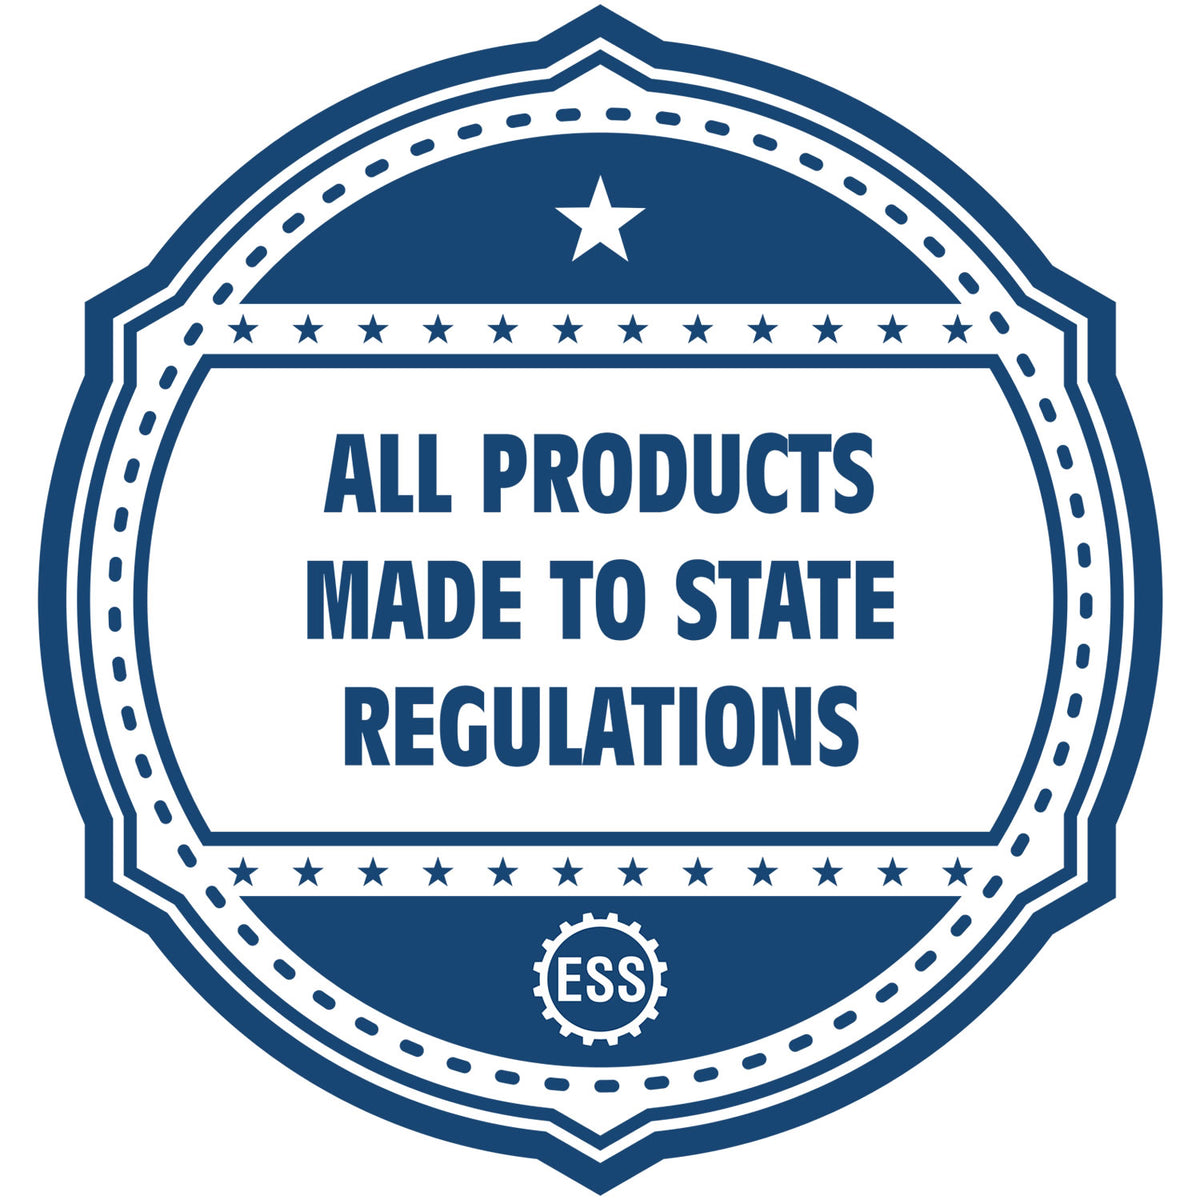 An icon or badge element for the State of Colorado Architectural Seal Embosser showing that this product is made in compliance with state regulations.